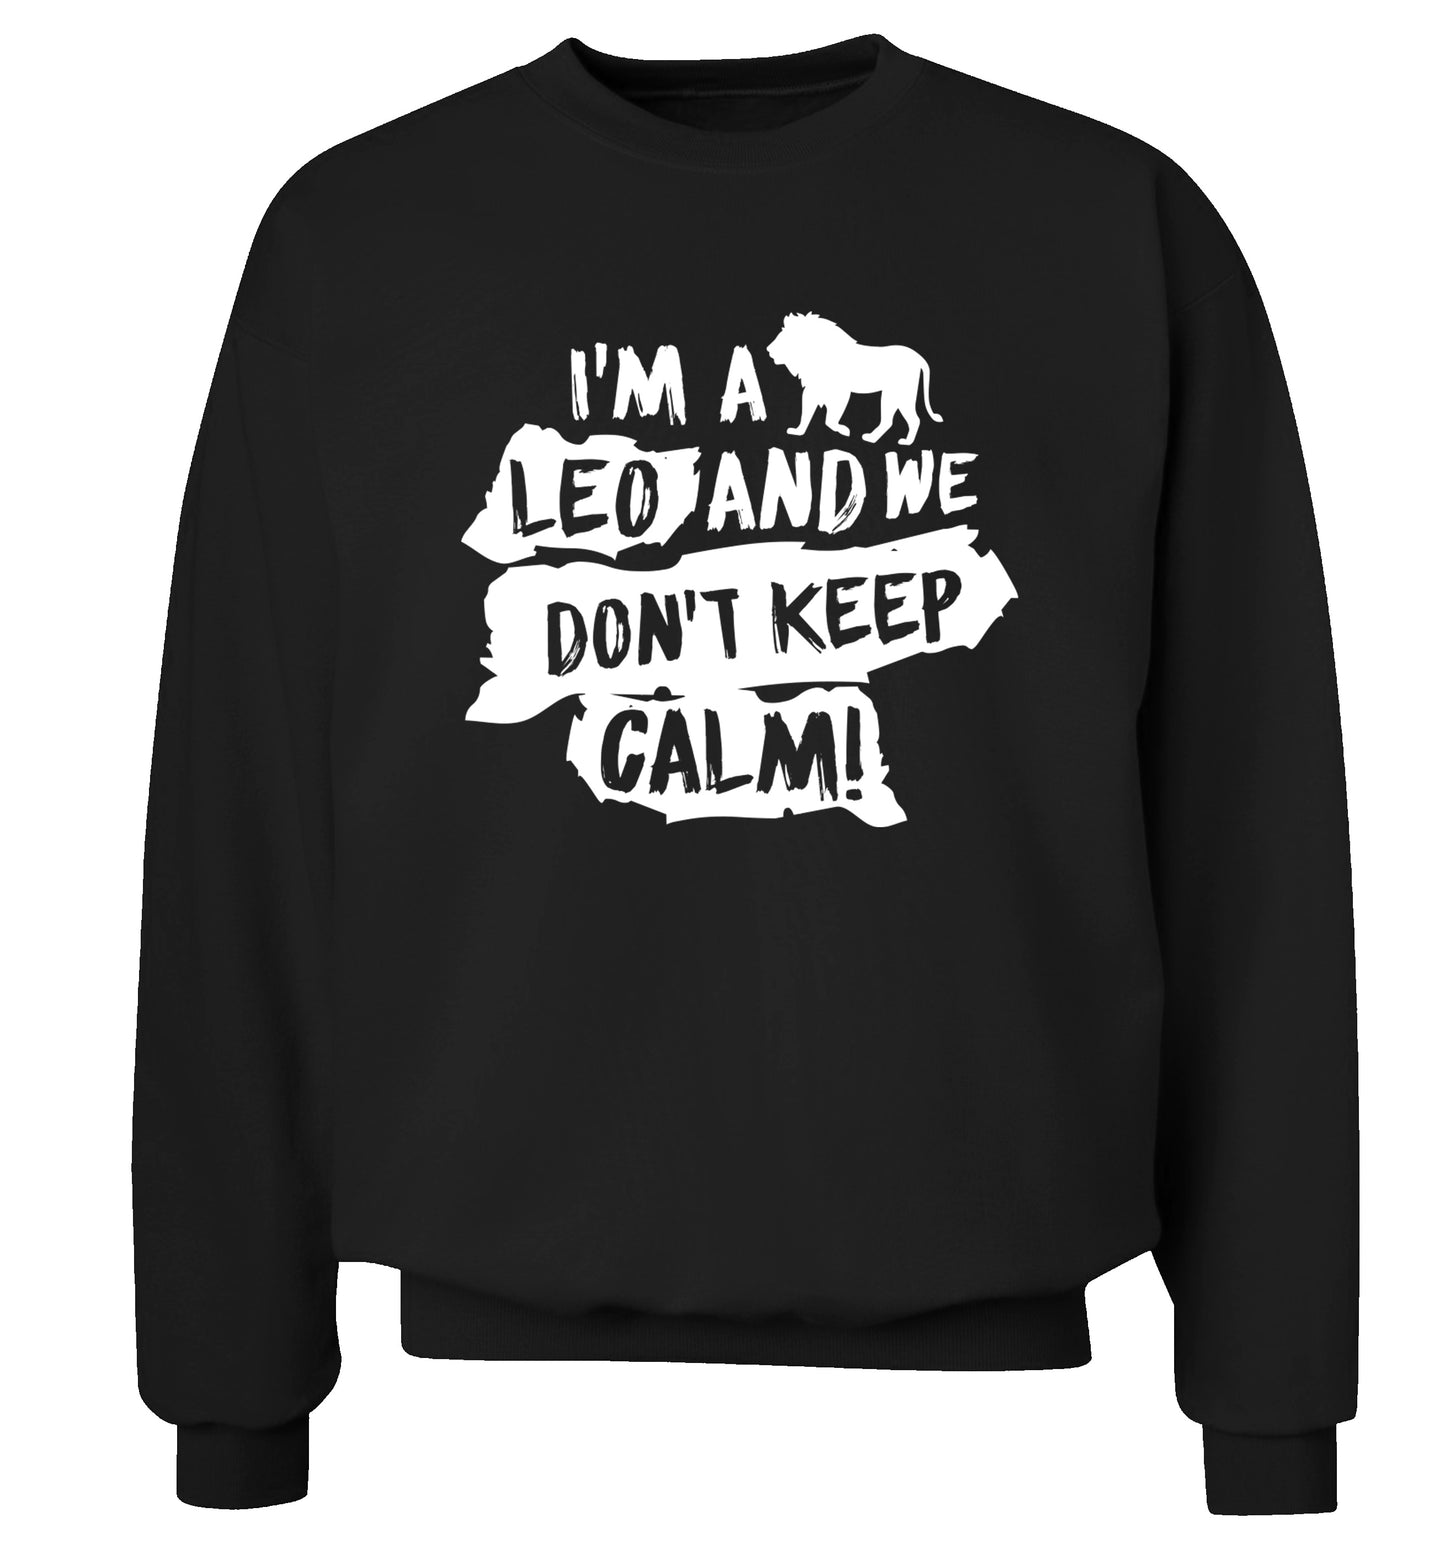 I'm a leo and we don't keep calm! Adult's unisex black Sweater 2XL